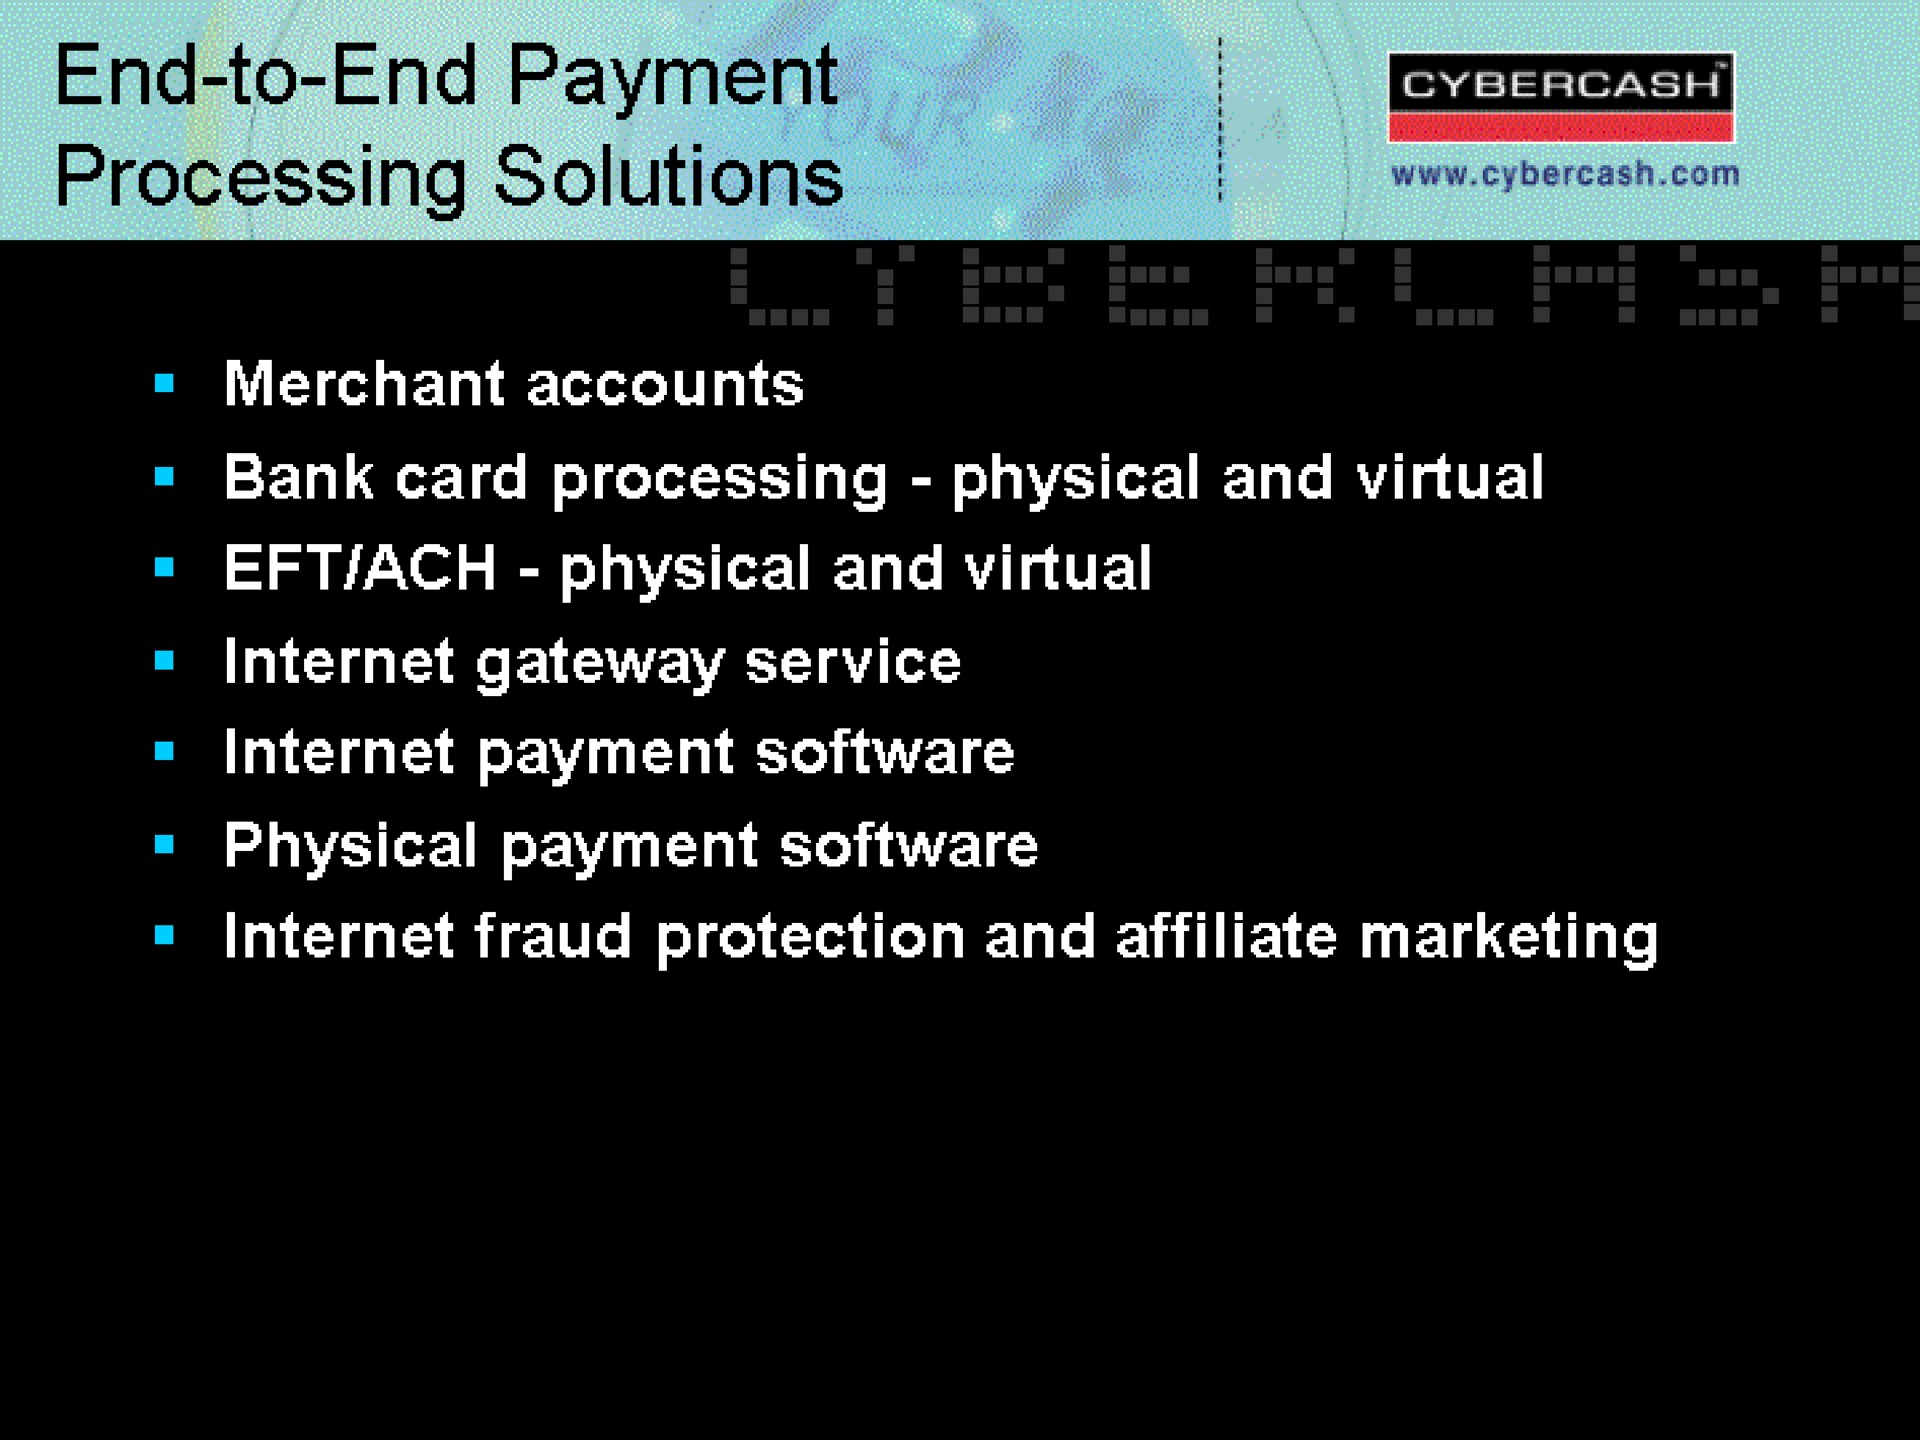 end to end payment processing solutions | CyberCash